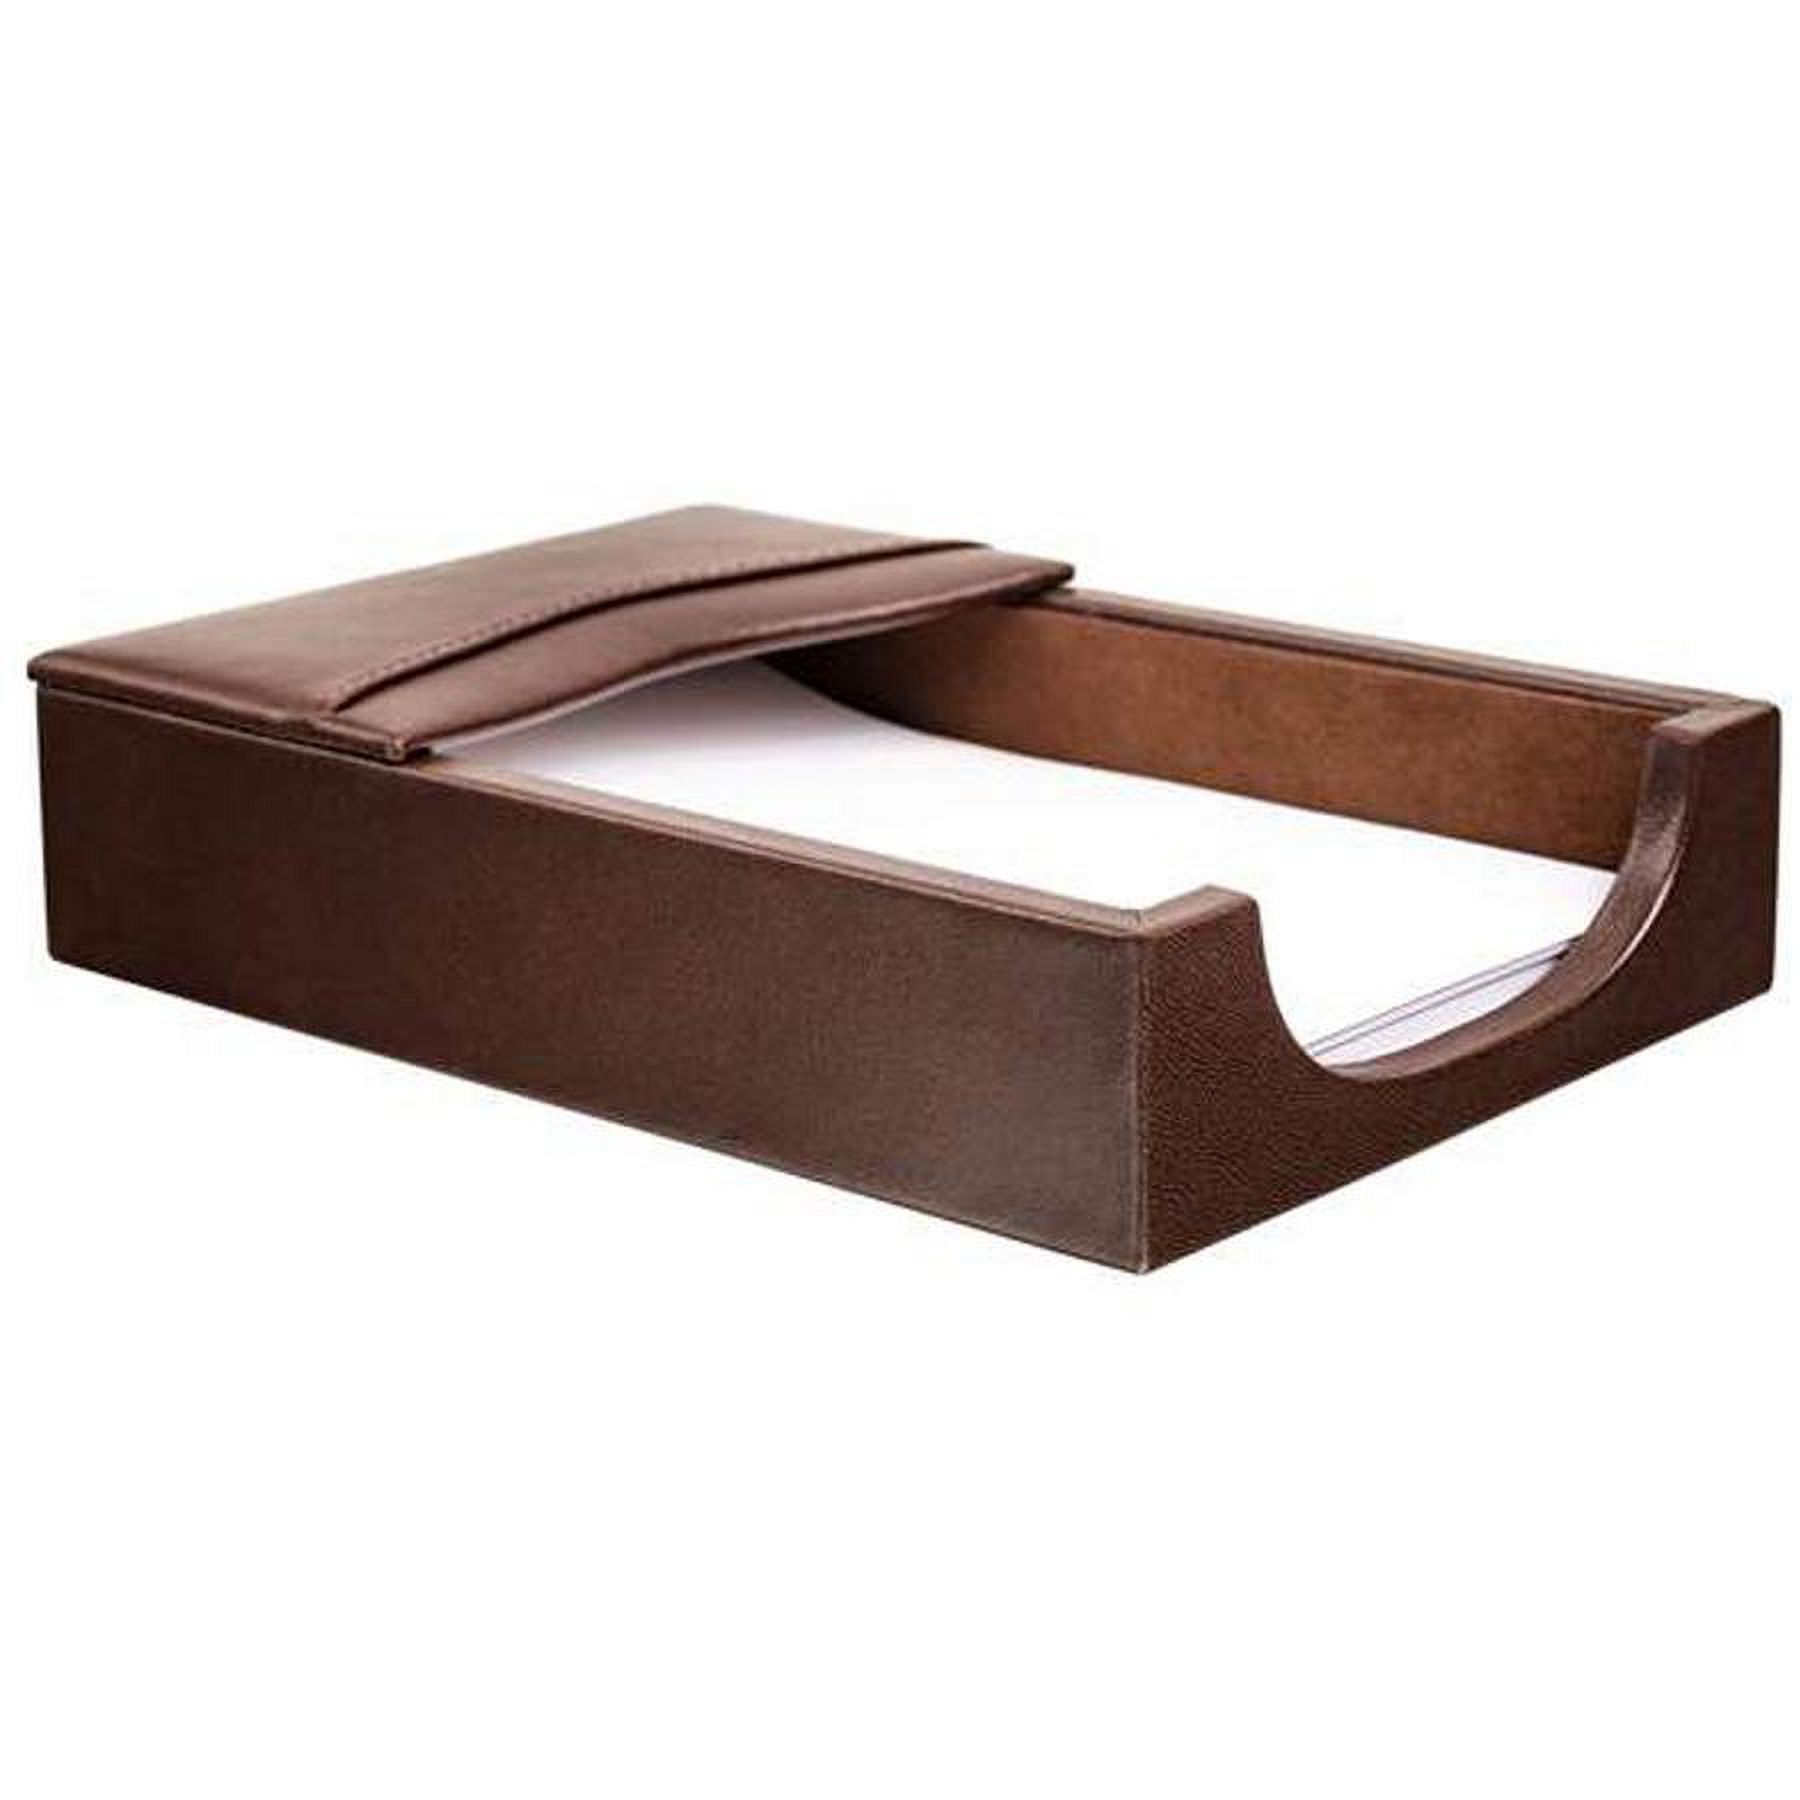 Chocolate Brown Leather 4 x 6 Memo Holder - image 2 of 2